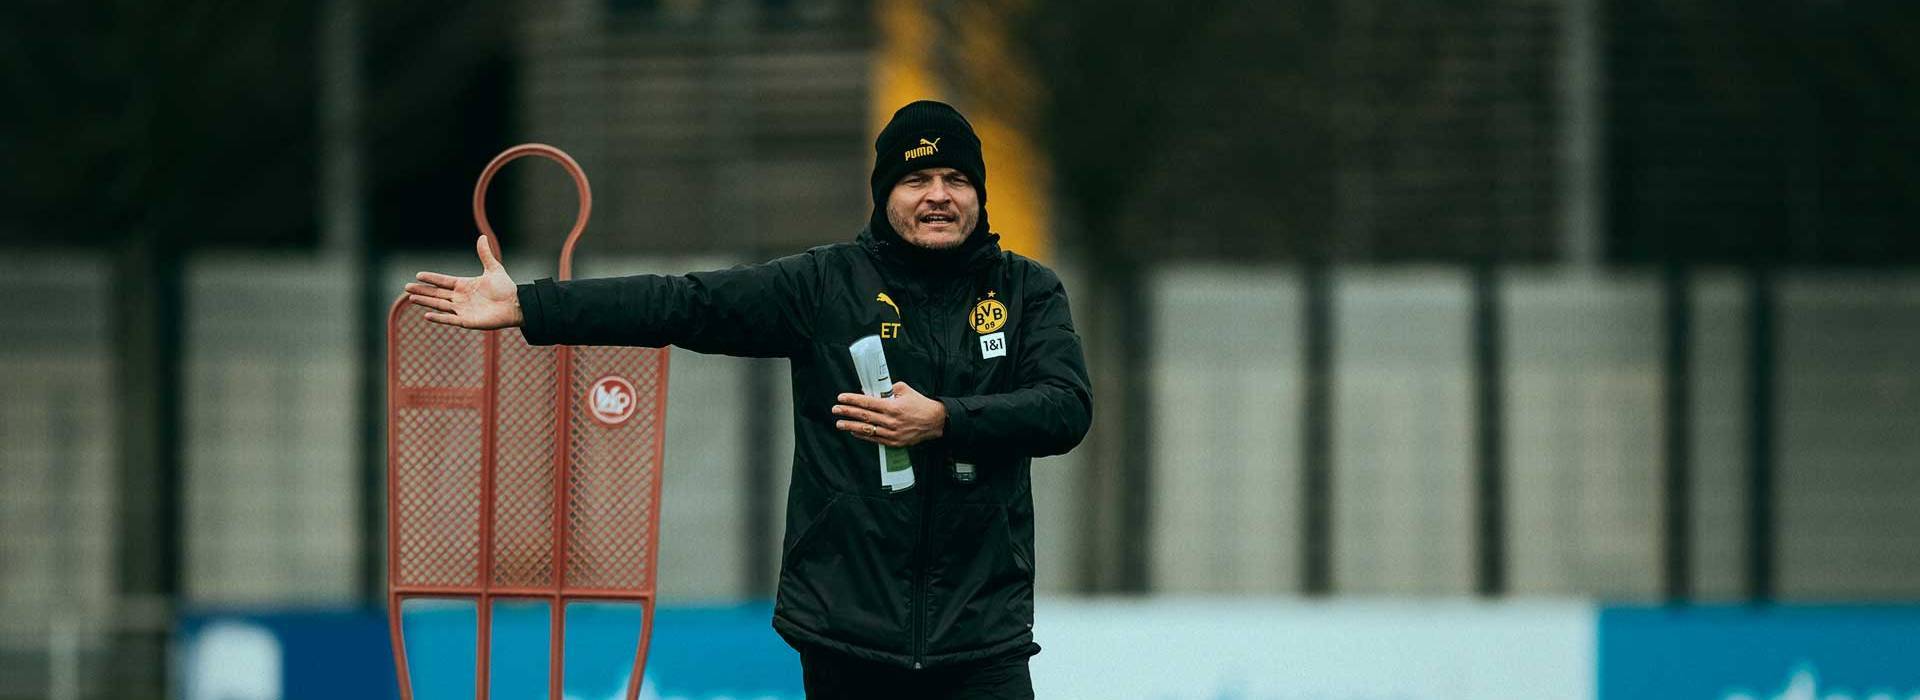 Terzic: "Pick up three points. That's the assignment!"